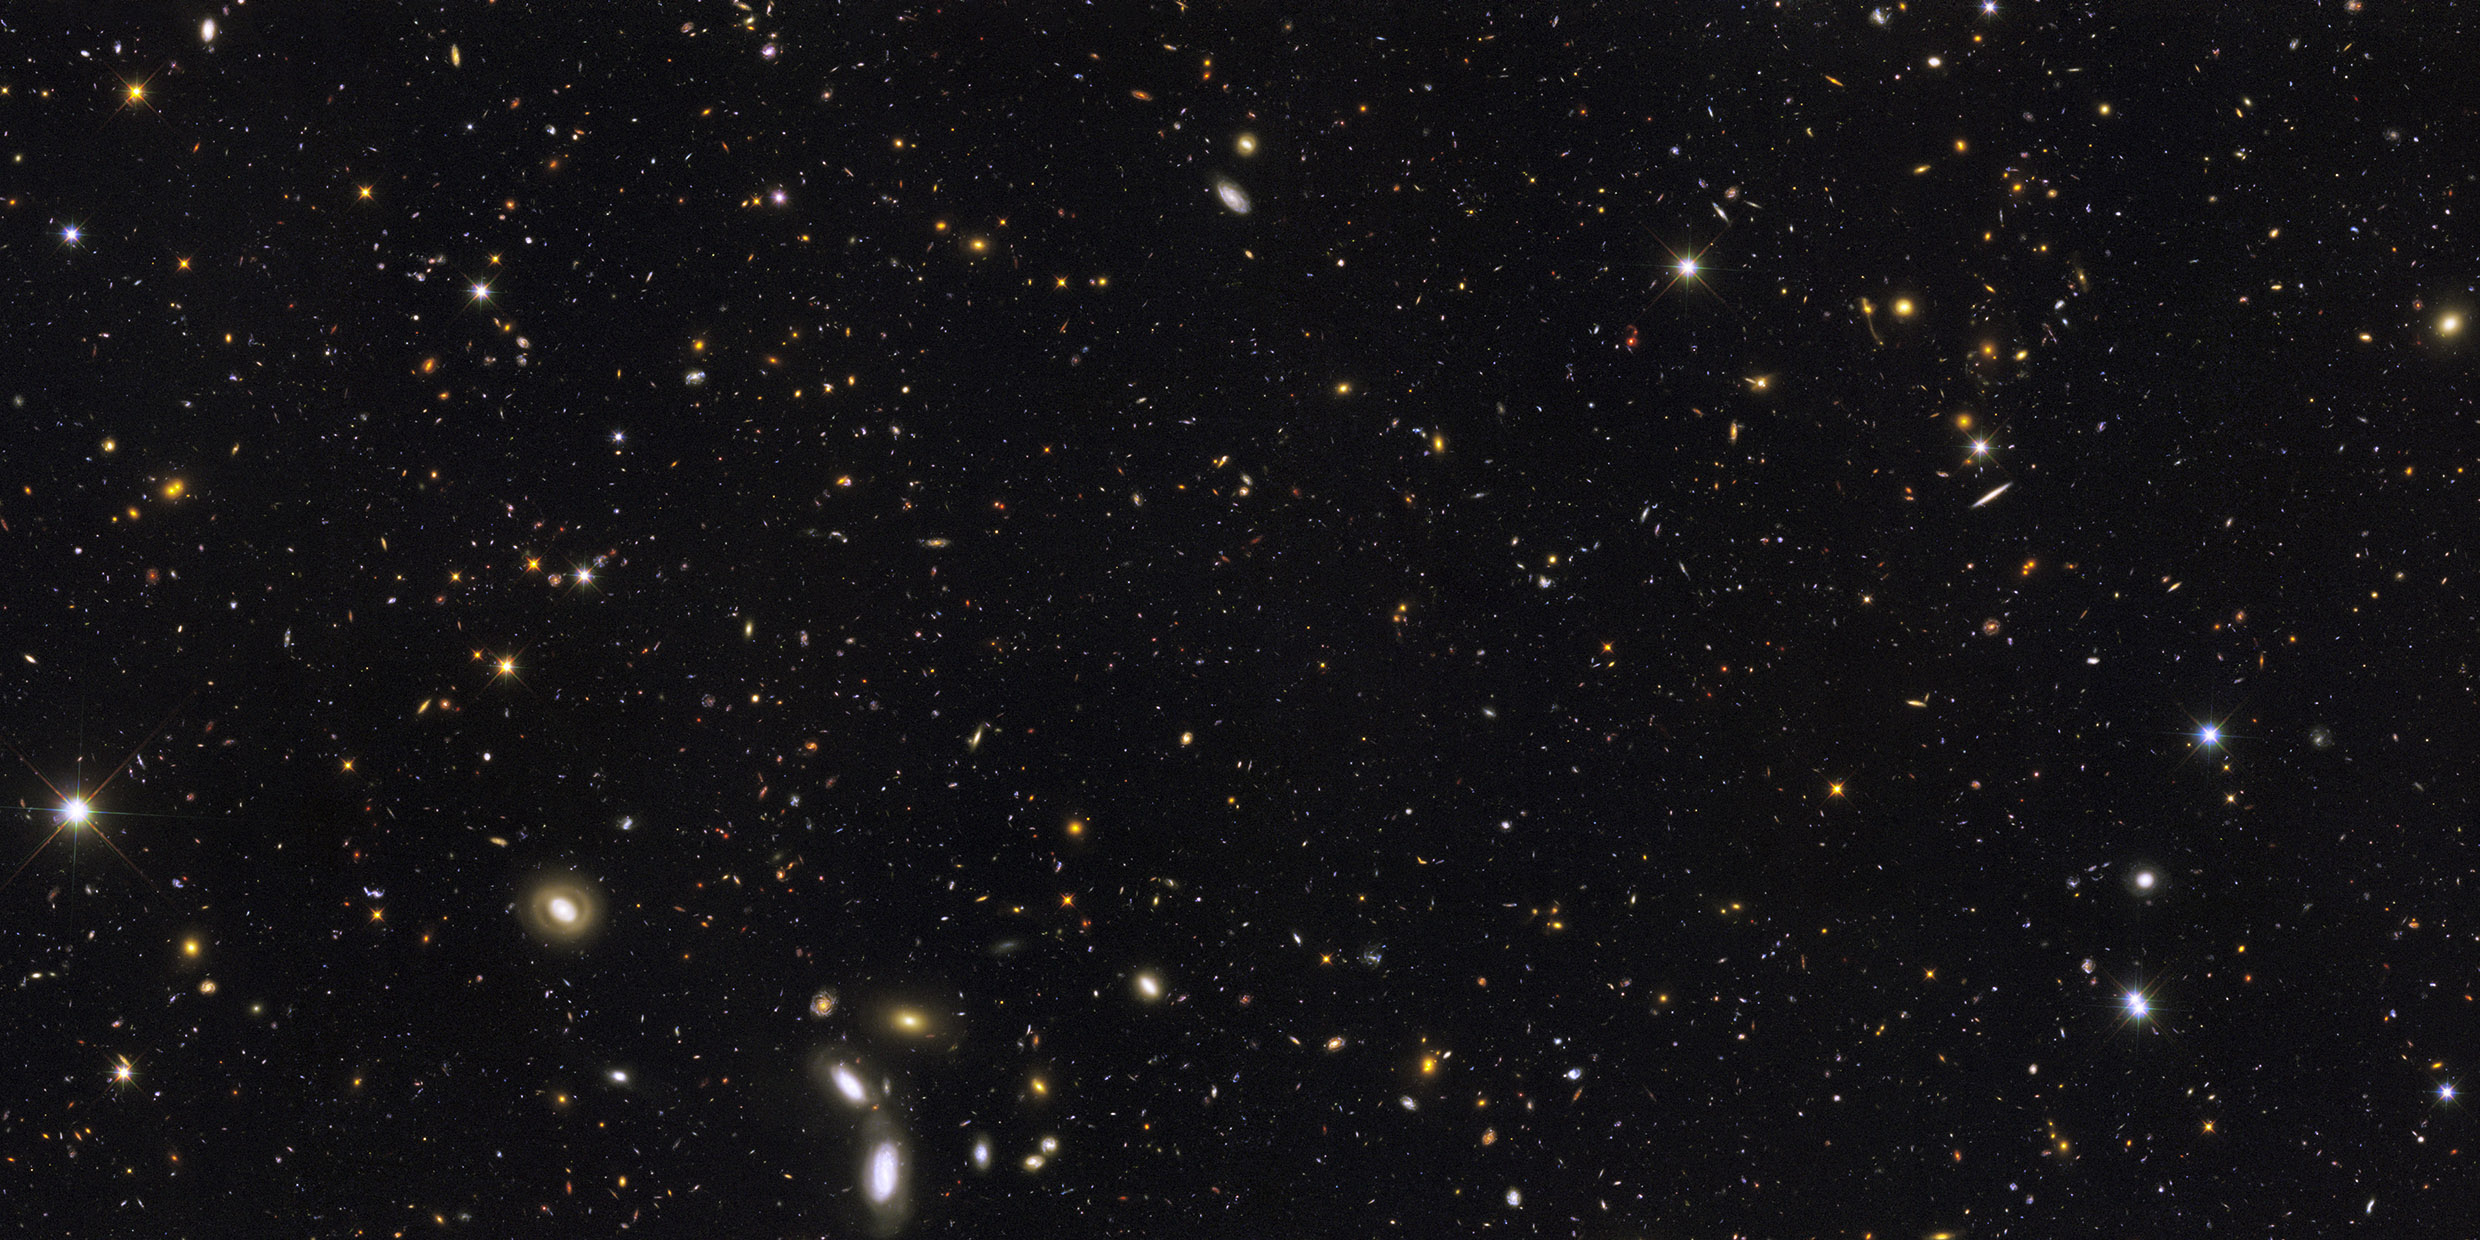 Image of countless galaxies